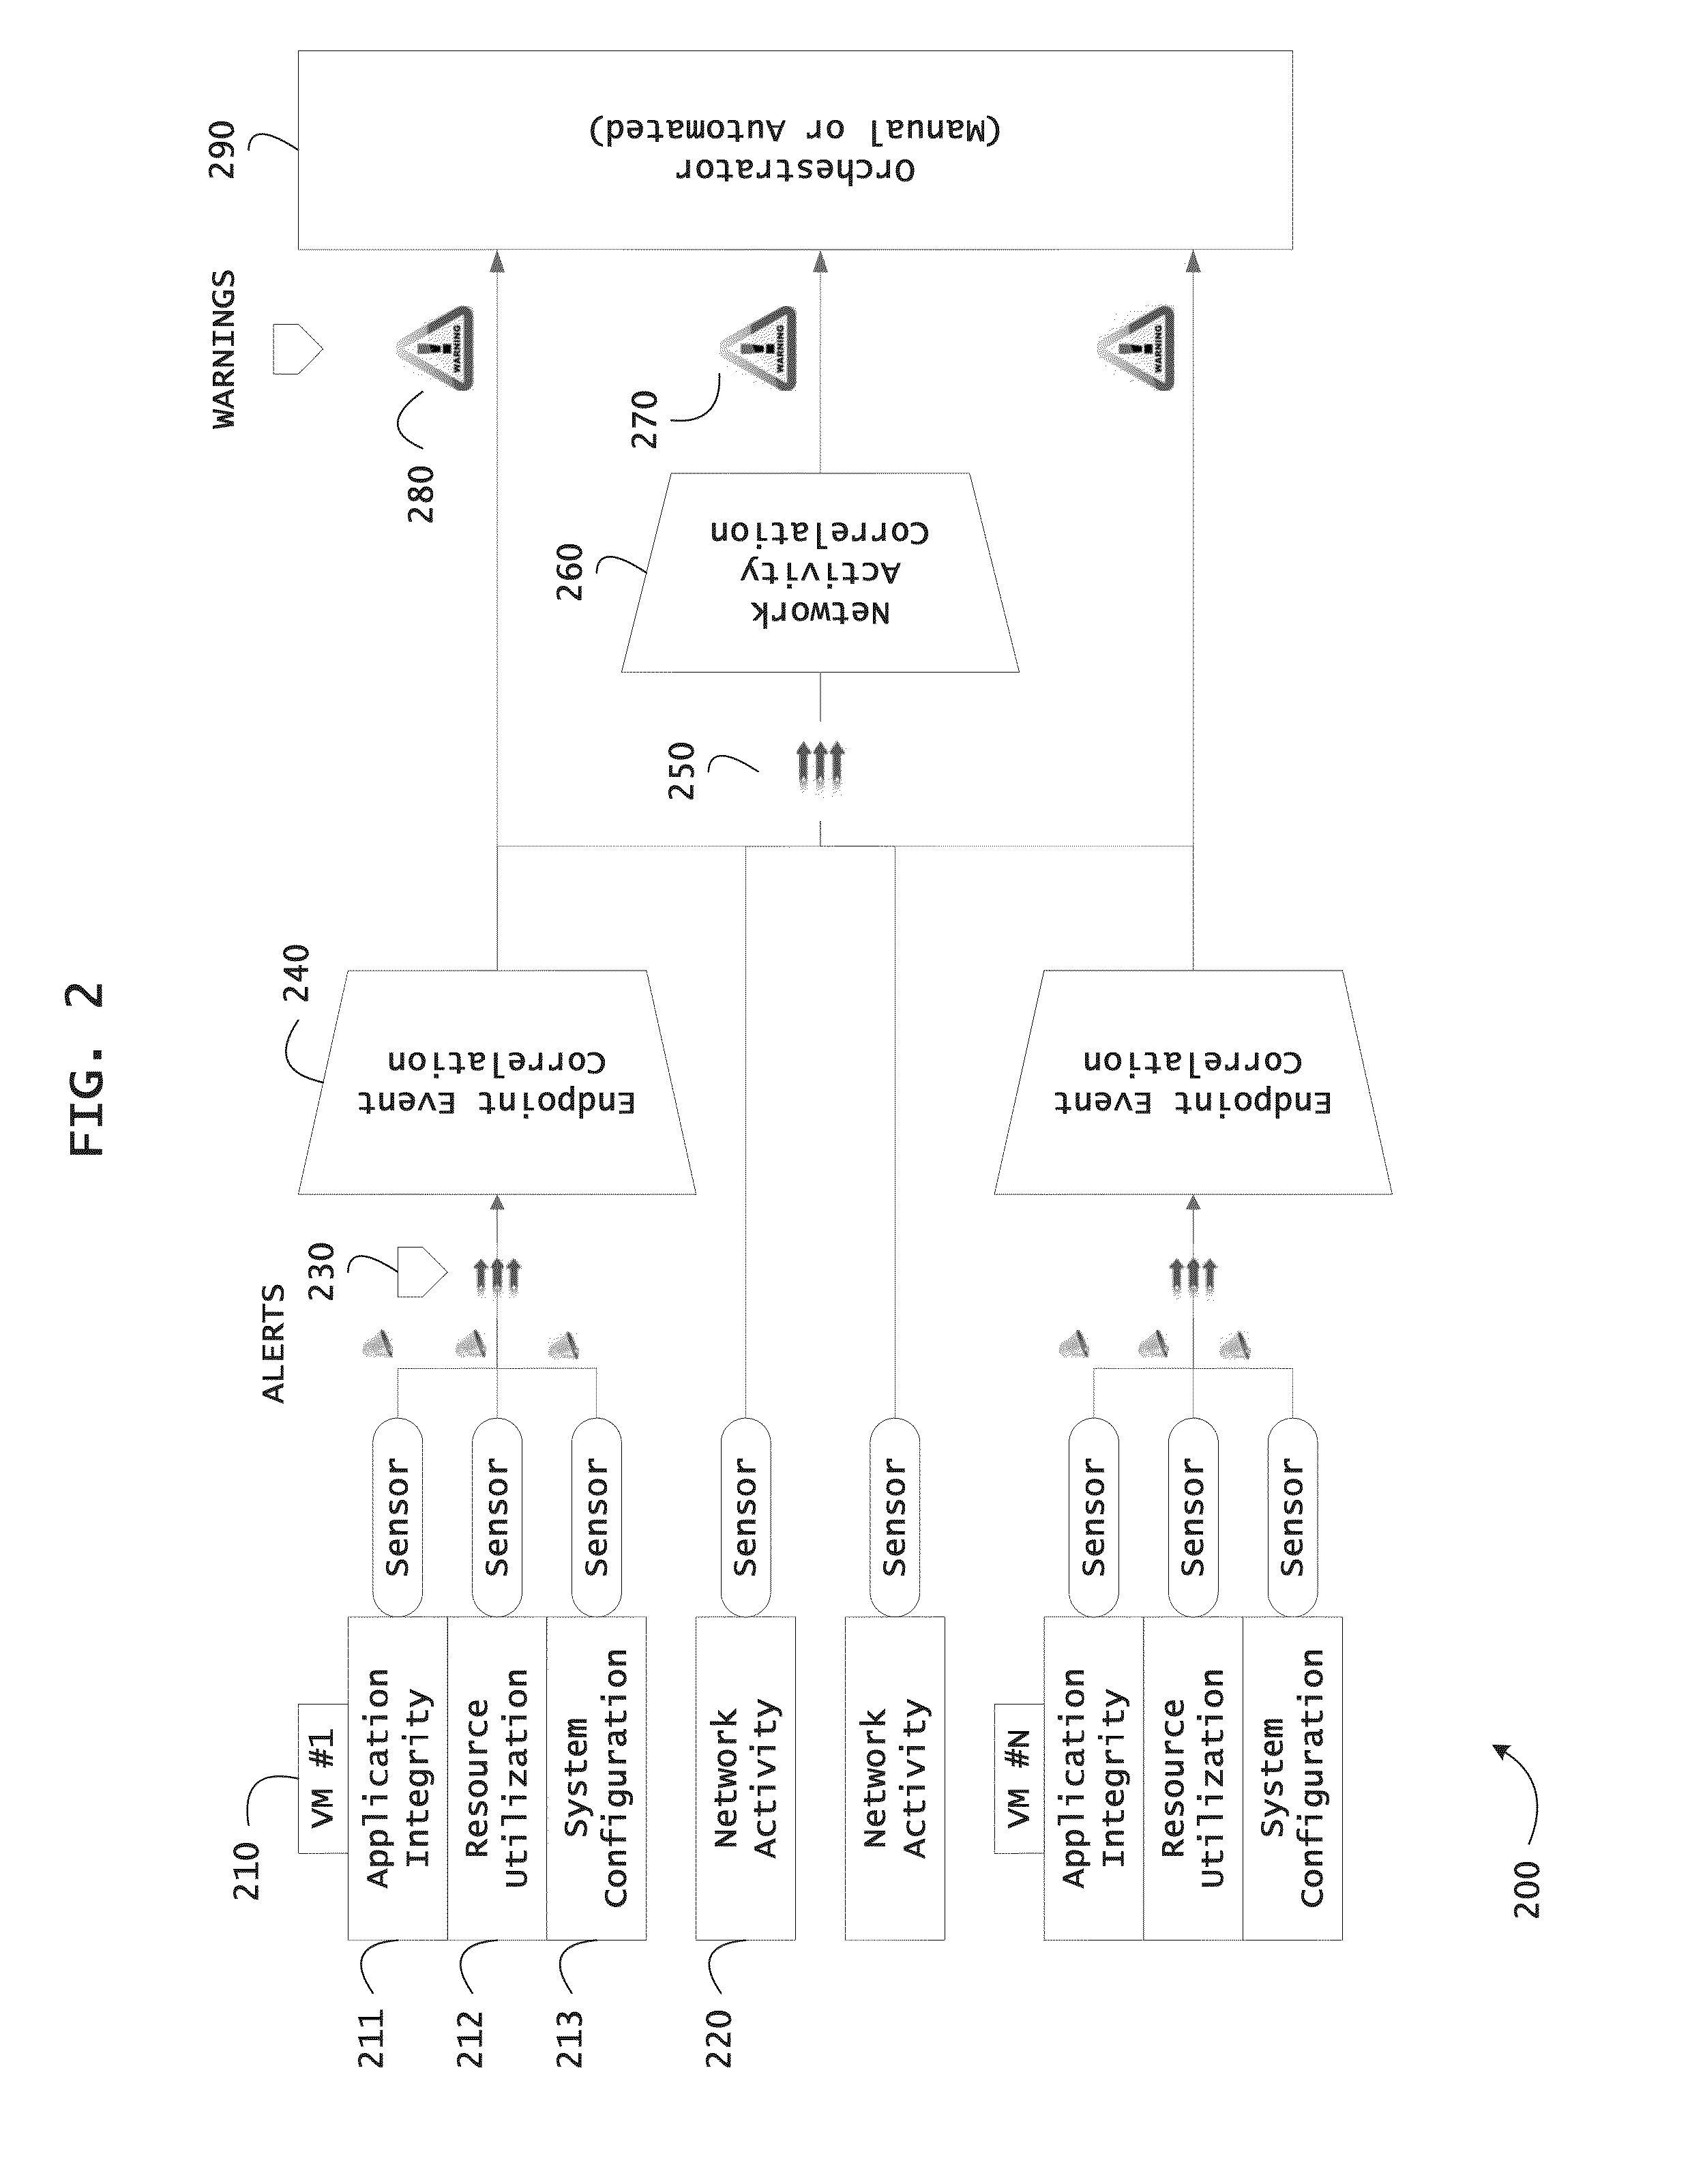 Systems and methods for threat identification and remediation